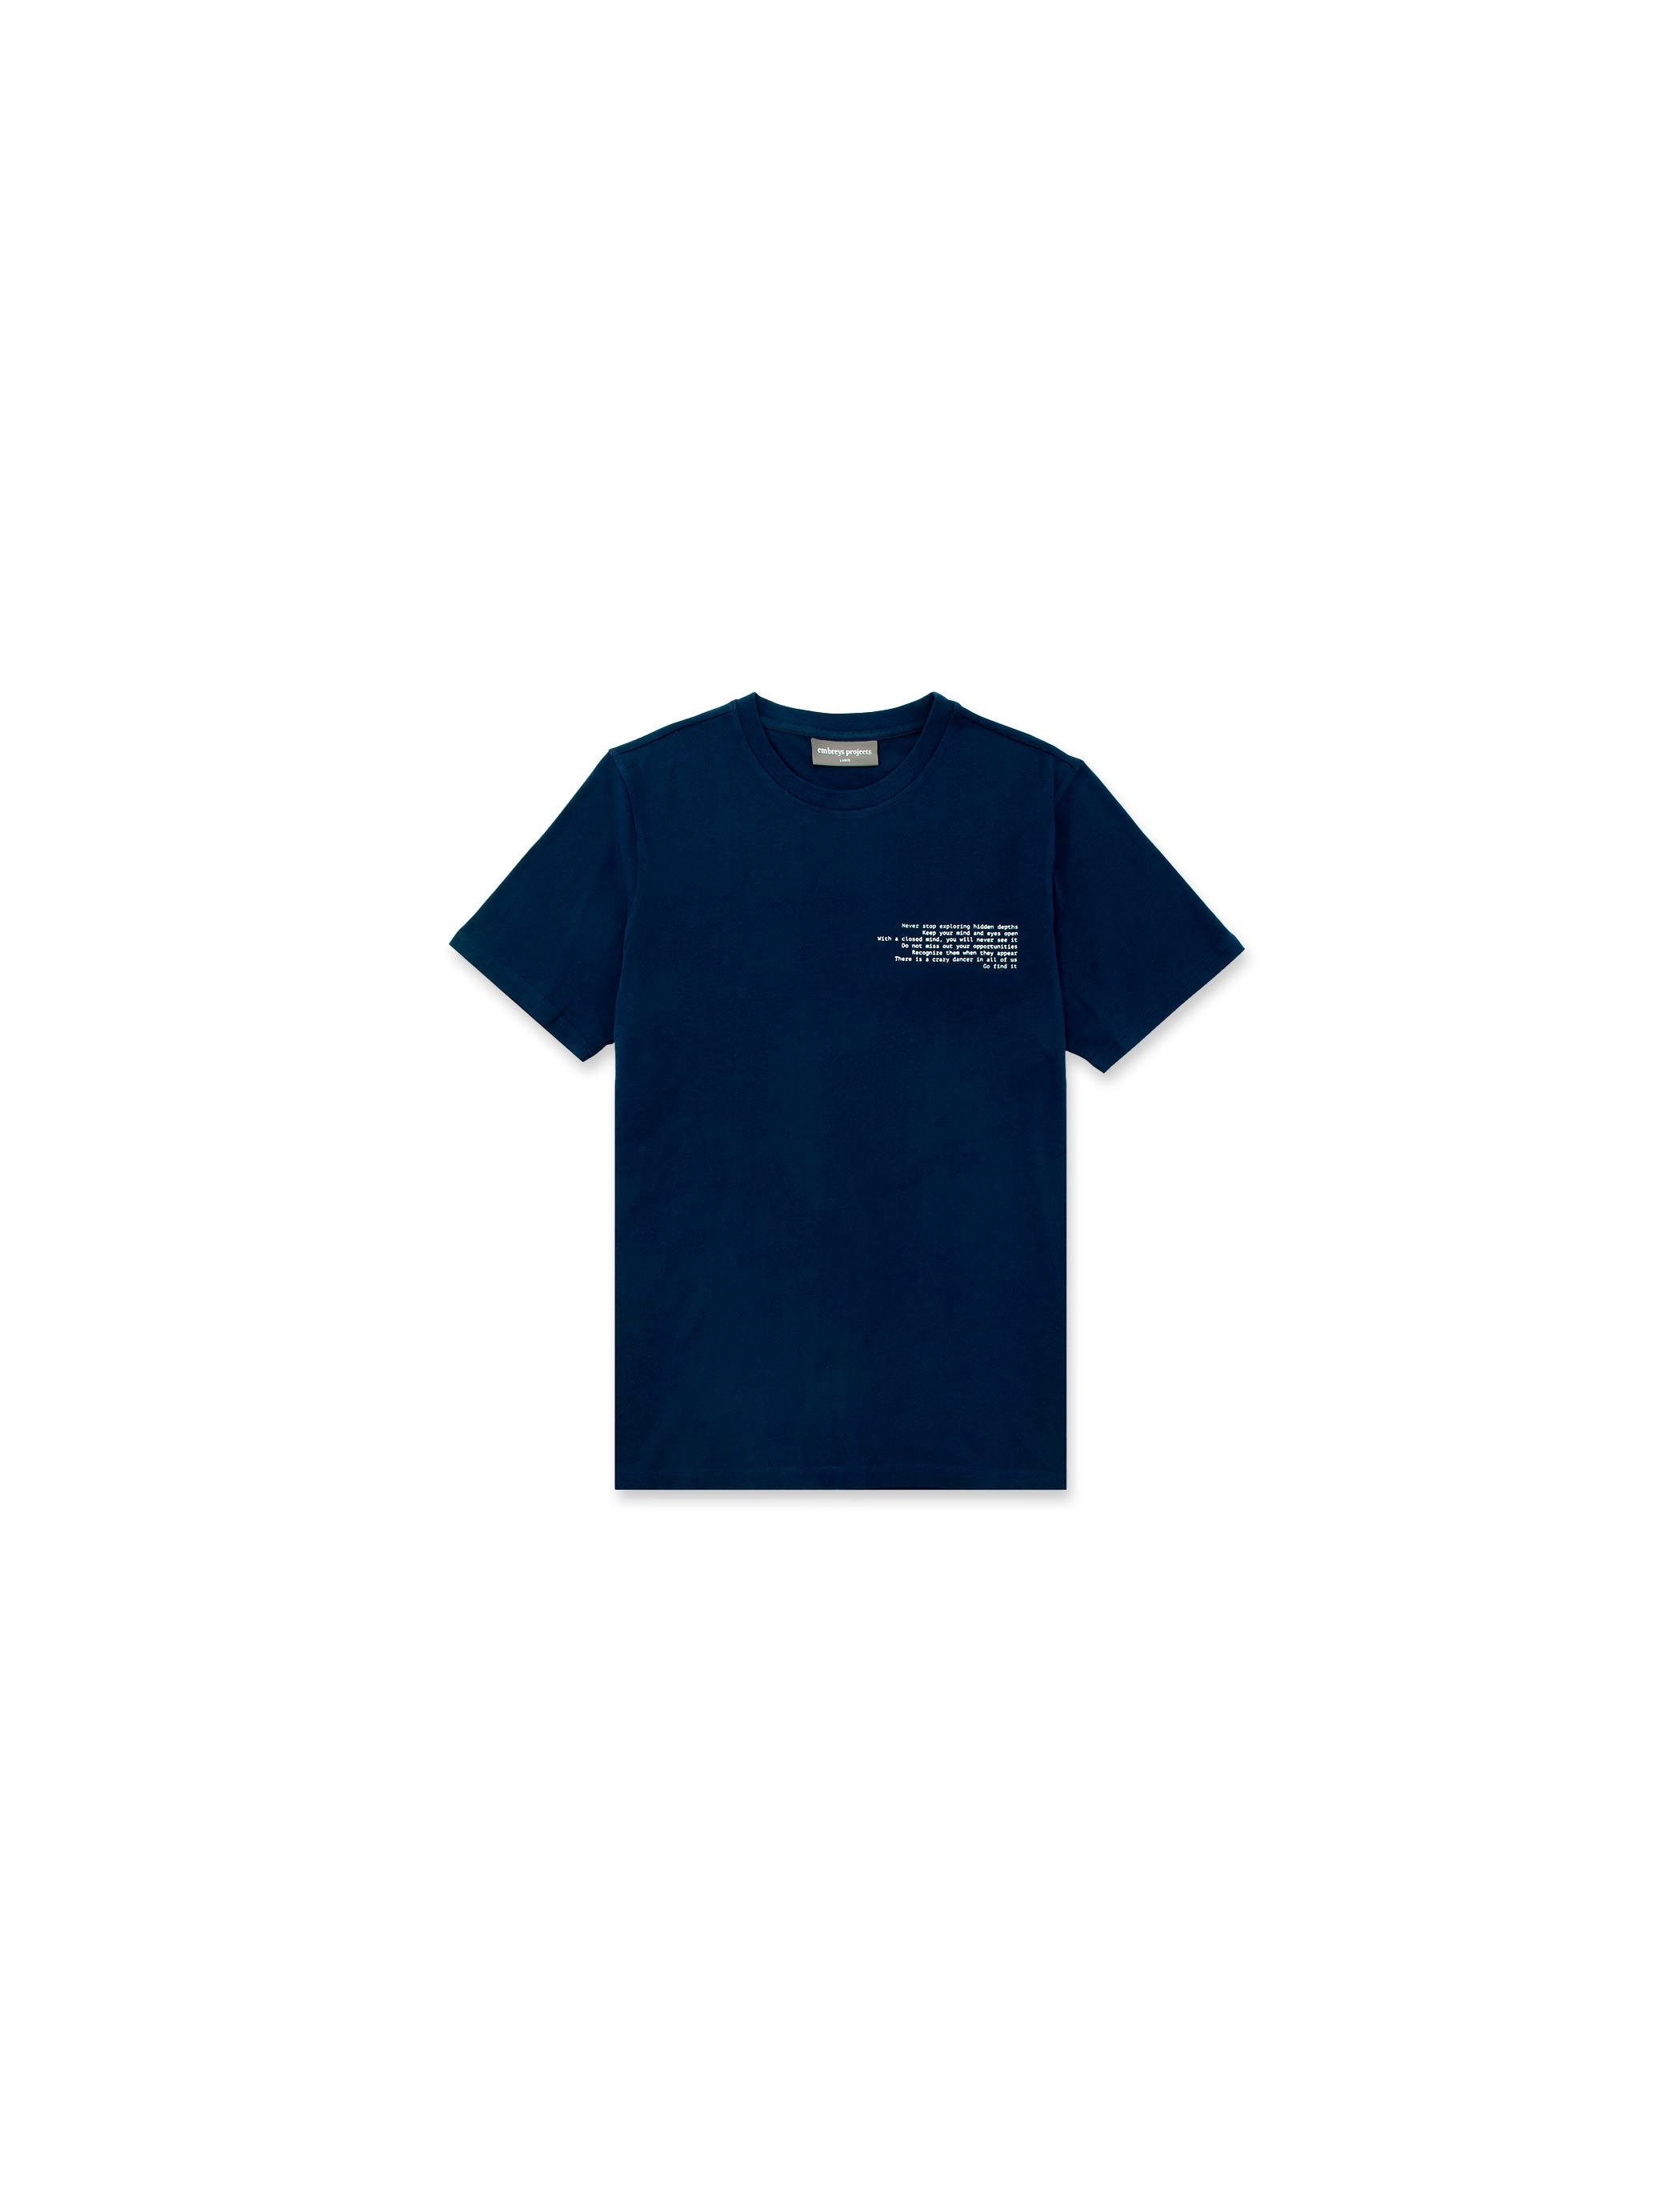 MONO SS TEE - PAGEANT BLUE (W) - Embreys Projects